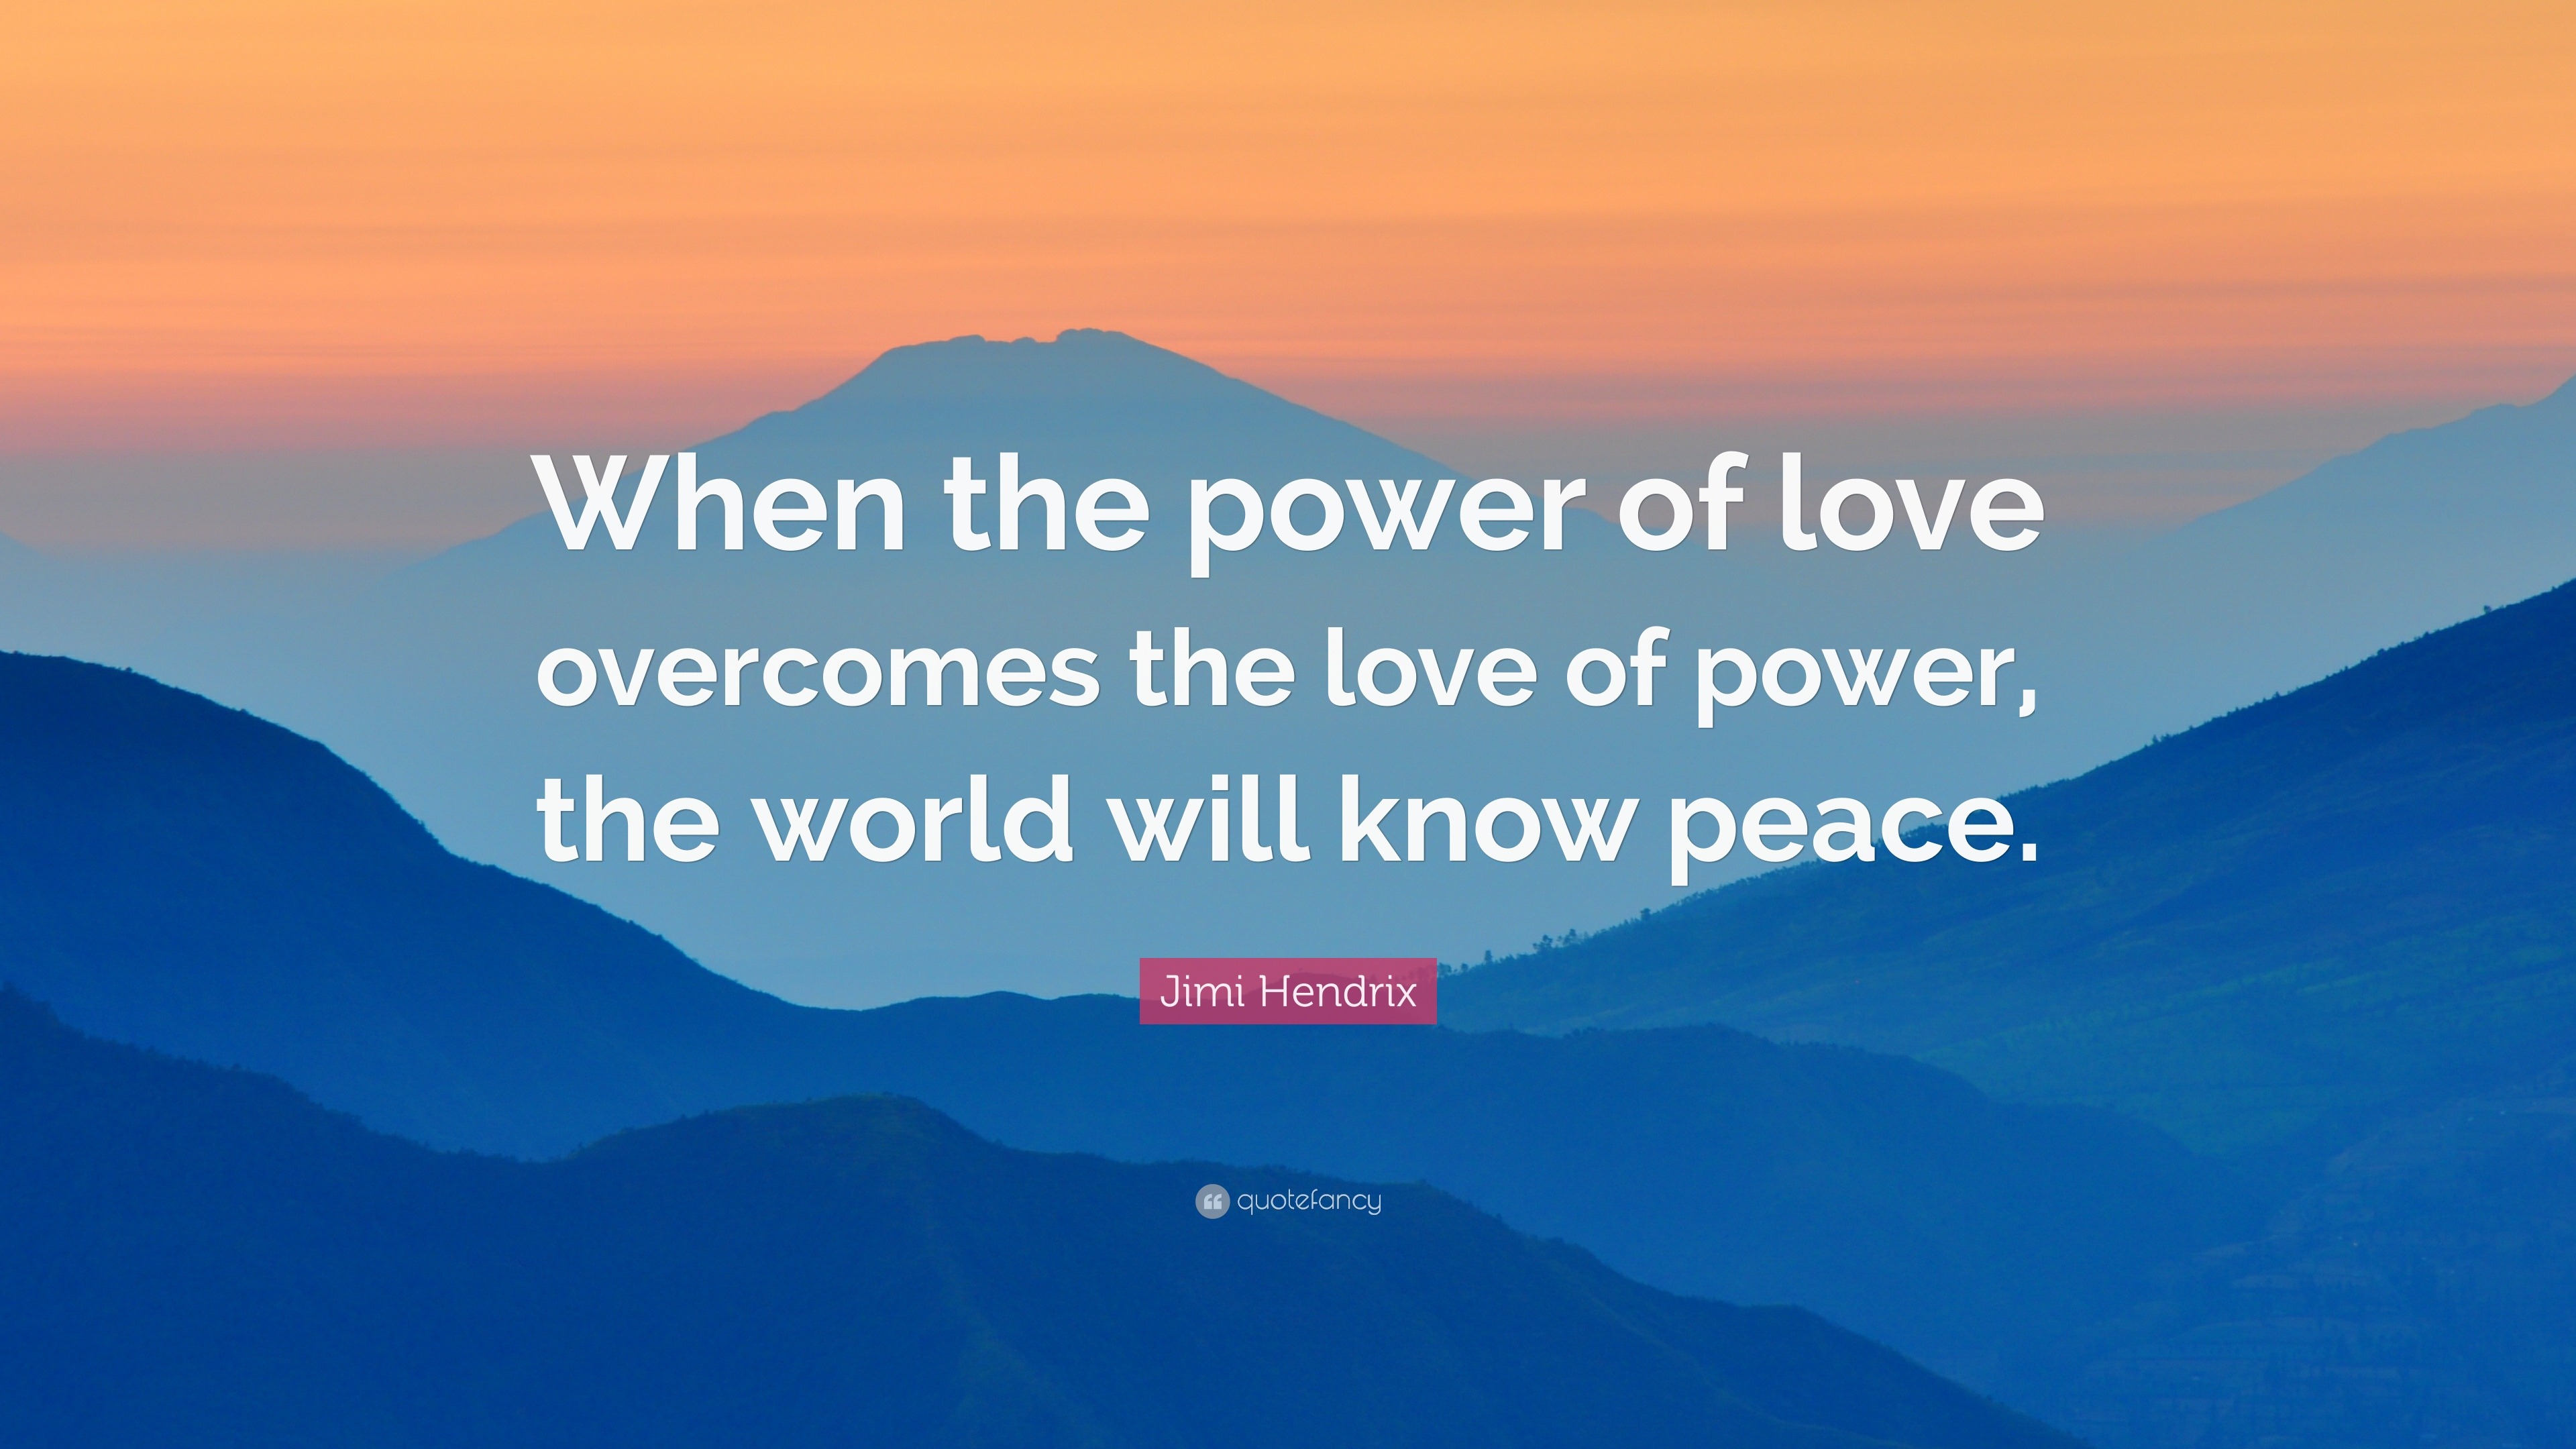 Jimi Hendrix Quote “When the power of love the